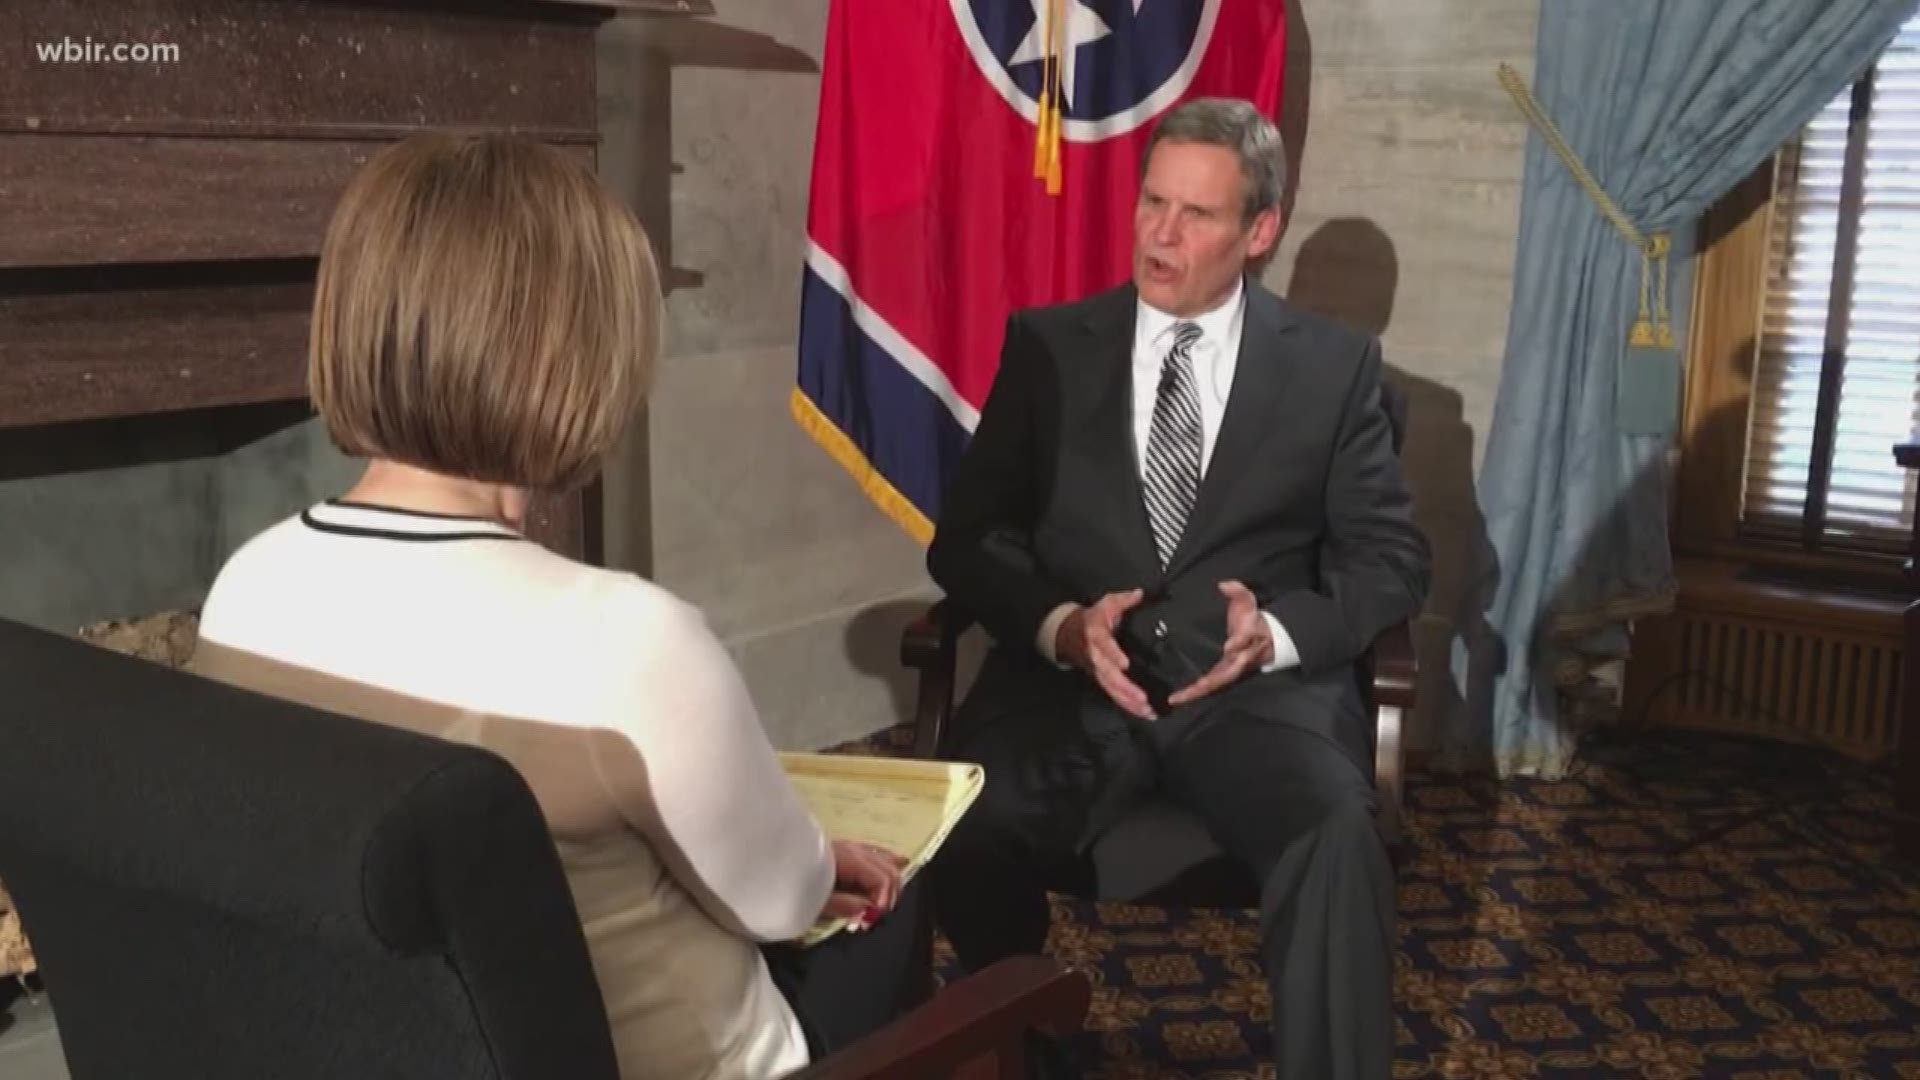 Robin Wilholt sat down with the governor-elect about his top priorities and joins us live from the state capitol.